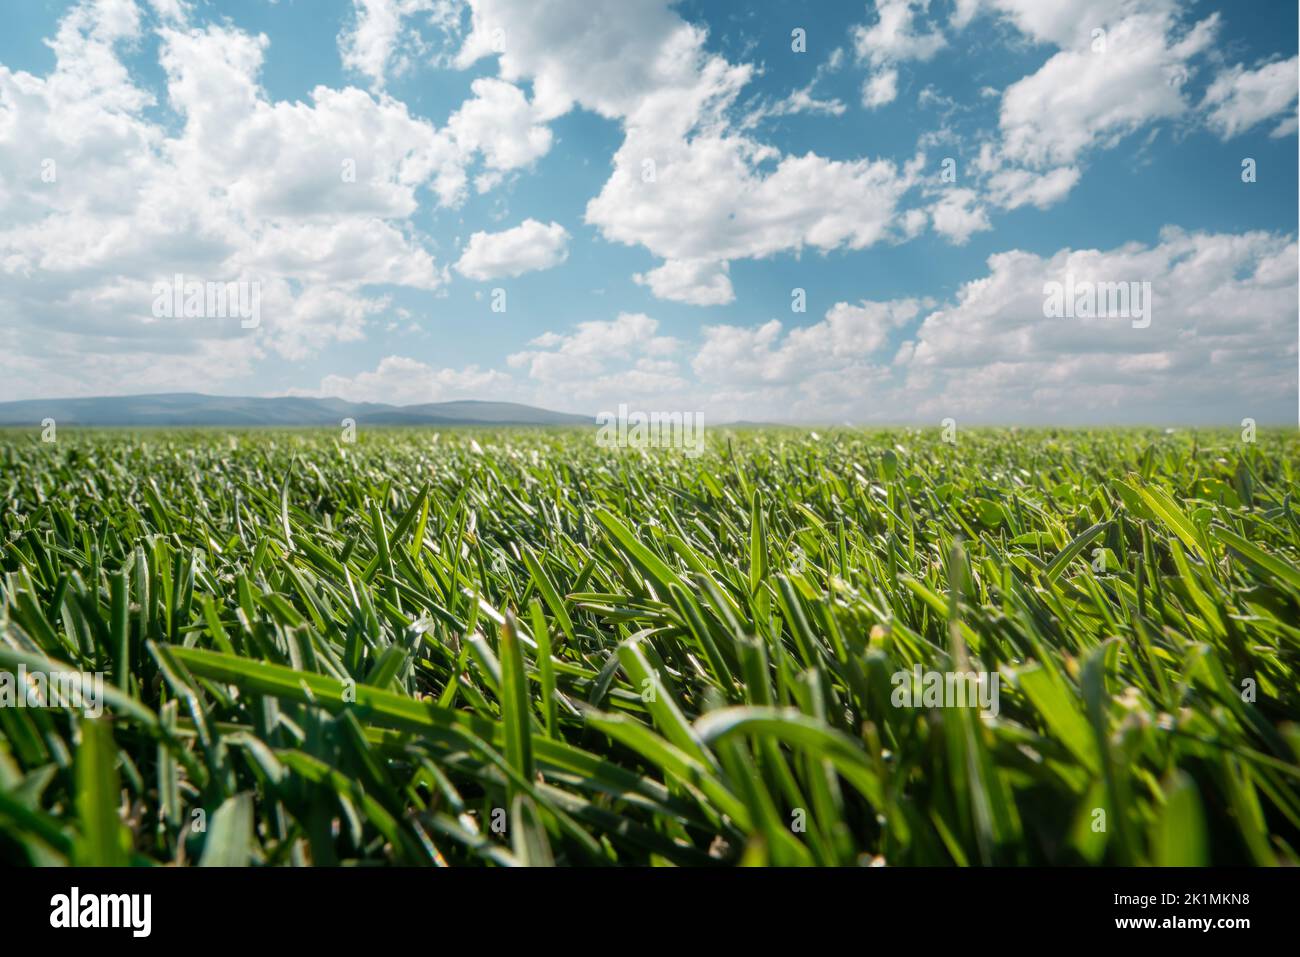 Green lawn leaves in open field, nature or park against the open sky with white puffy clouds. High quality photo Stock Photo